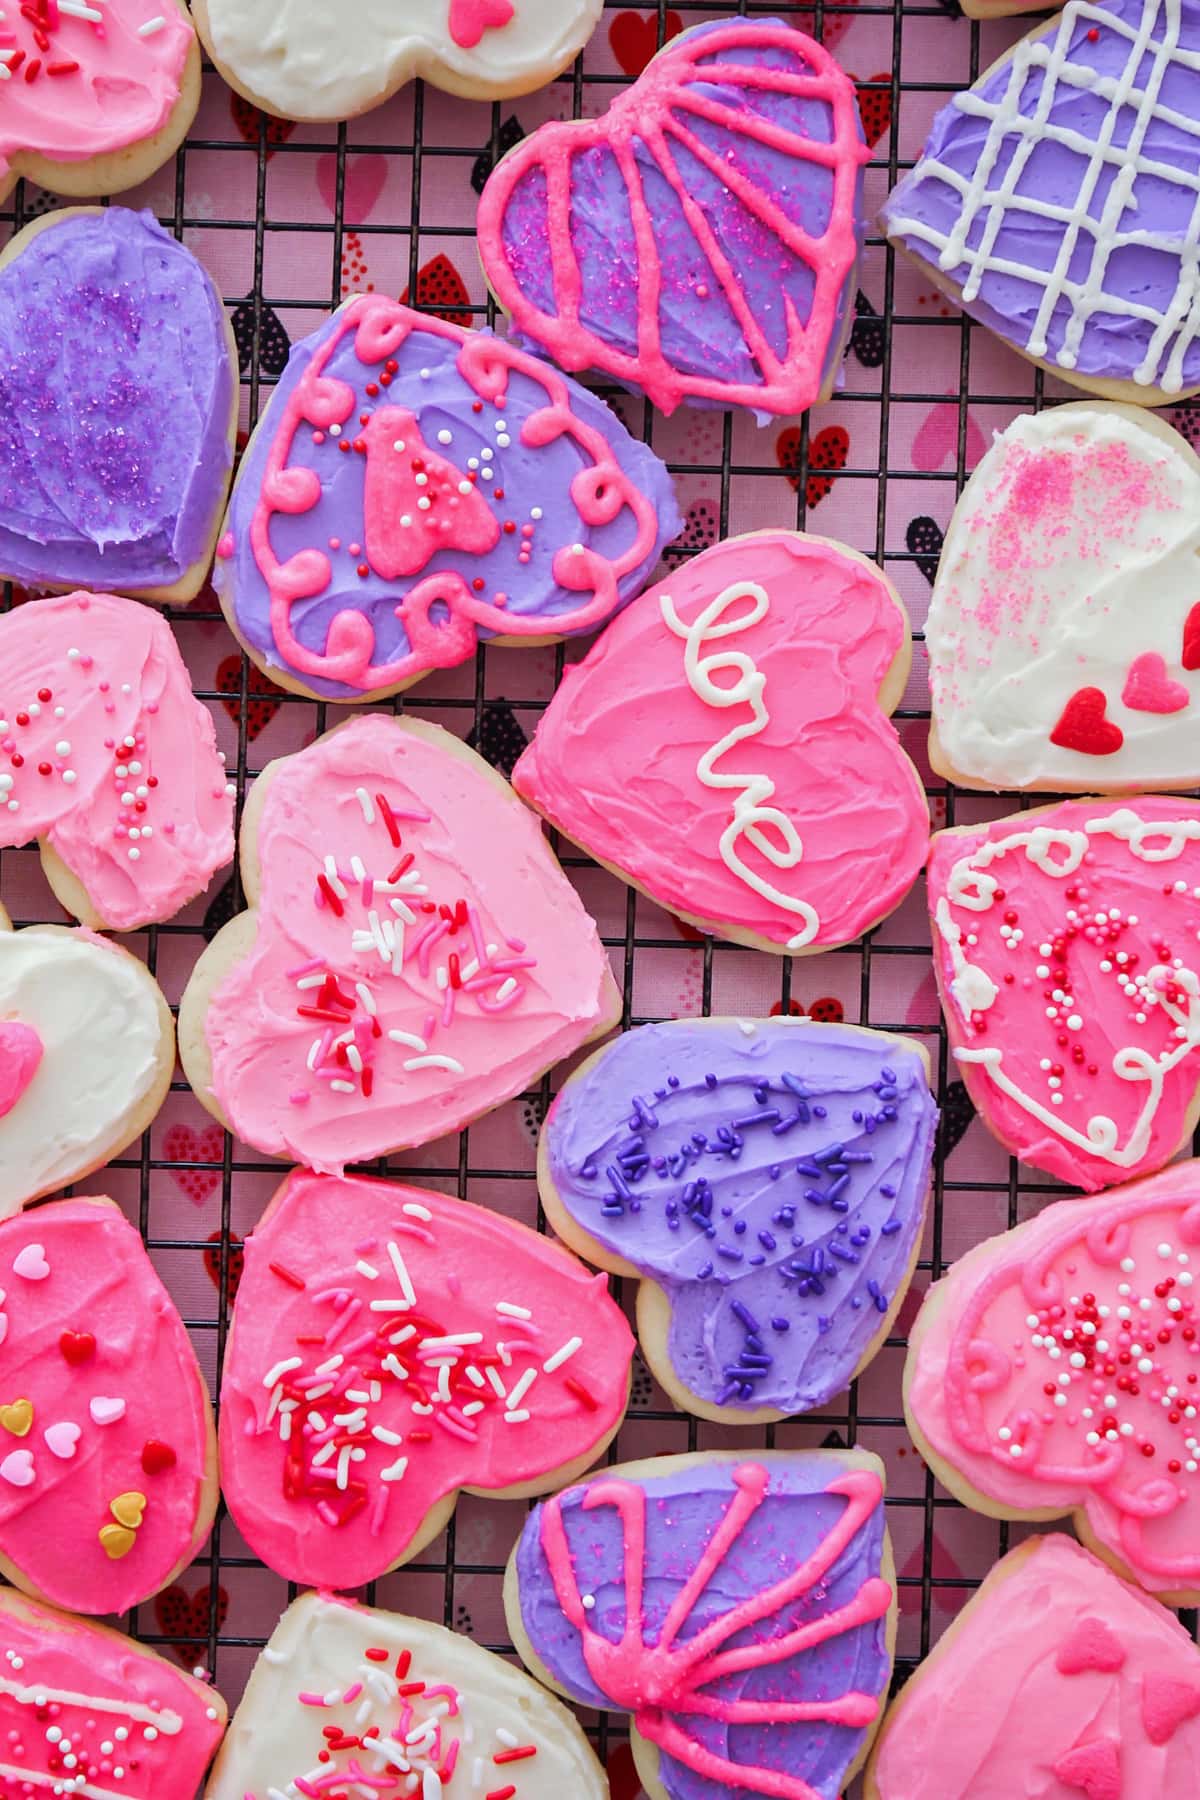 Frosted Valentine Sugar Cookies on wire rack.